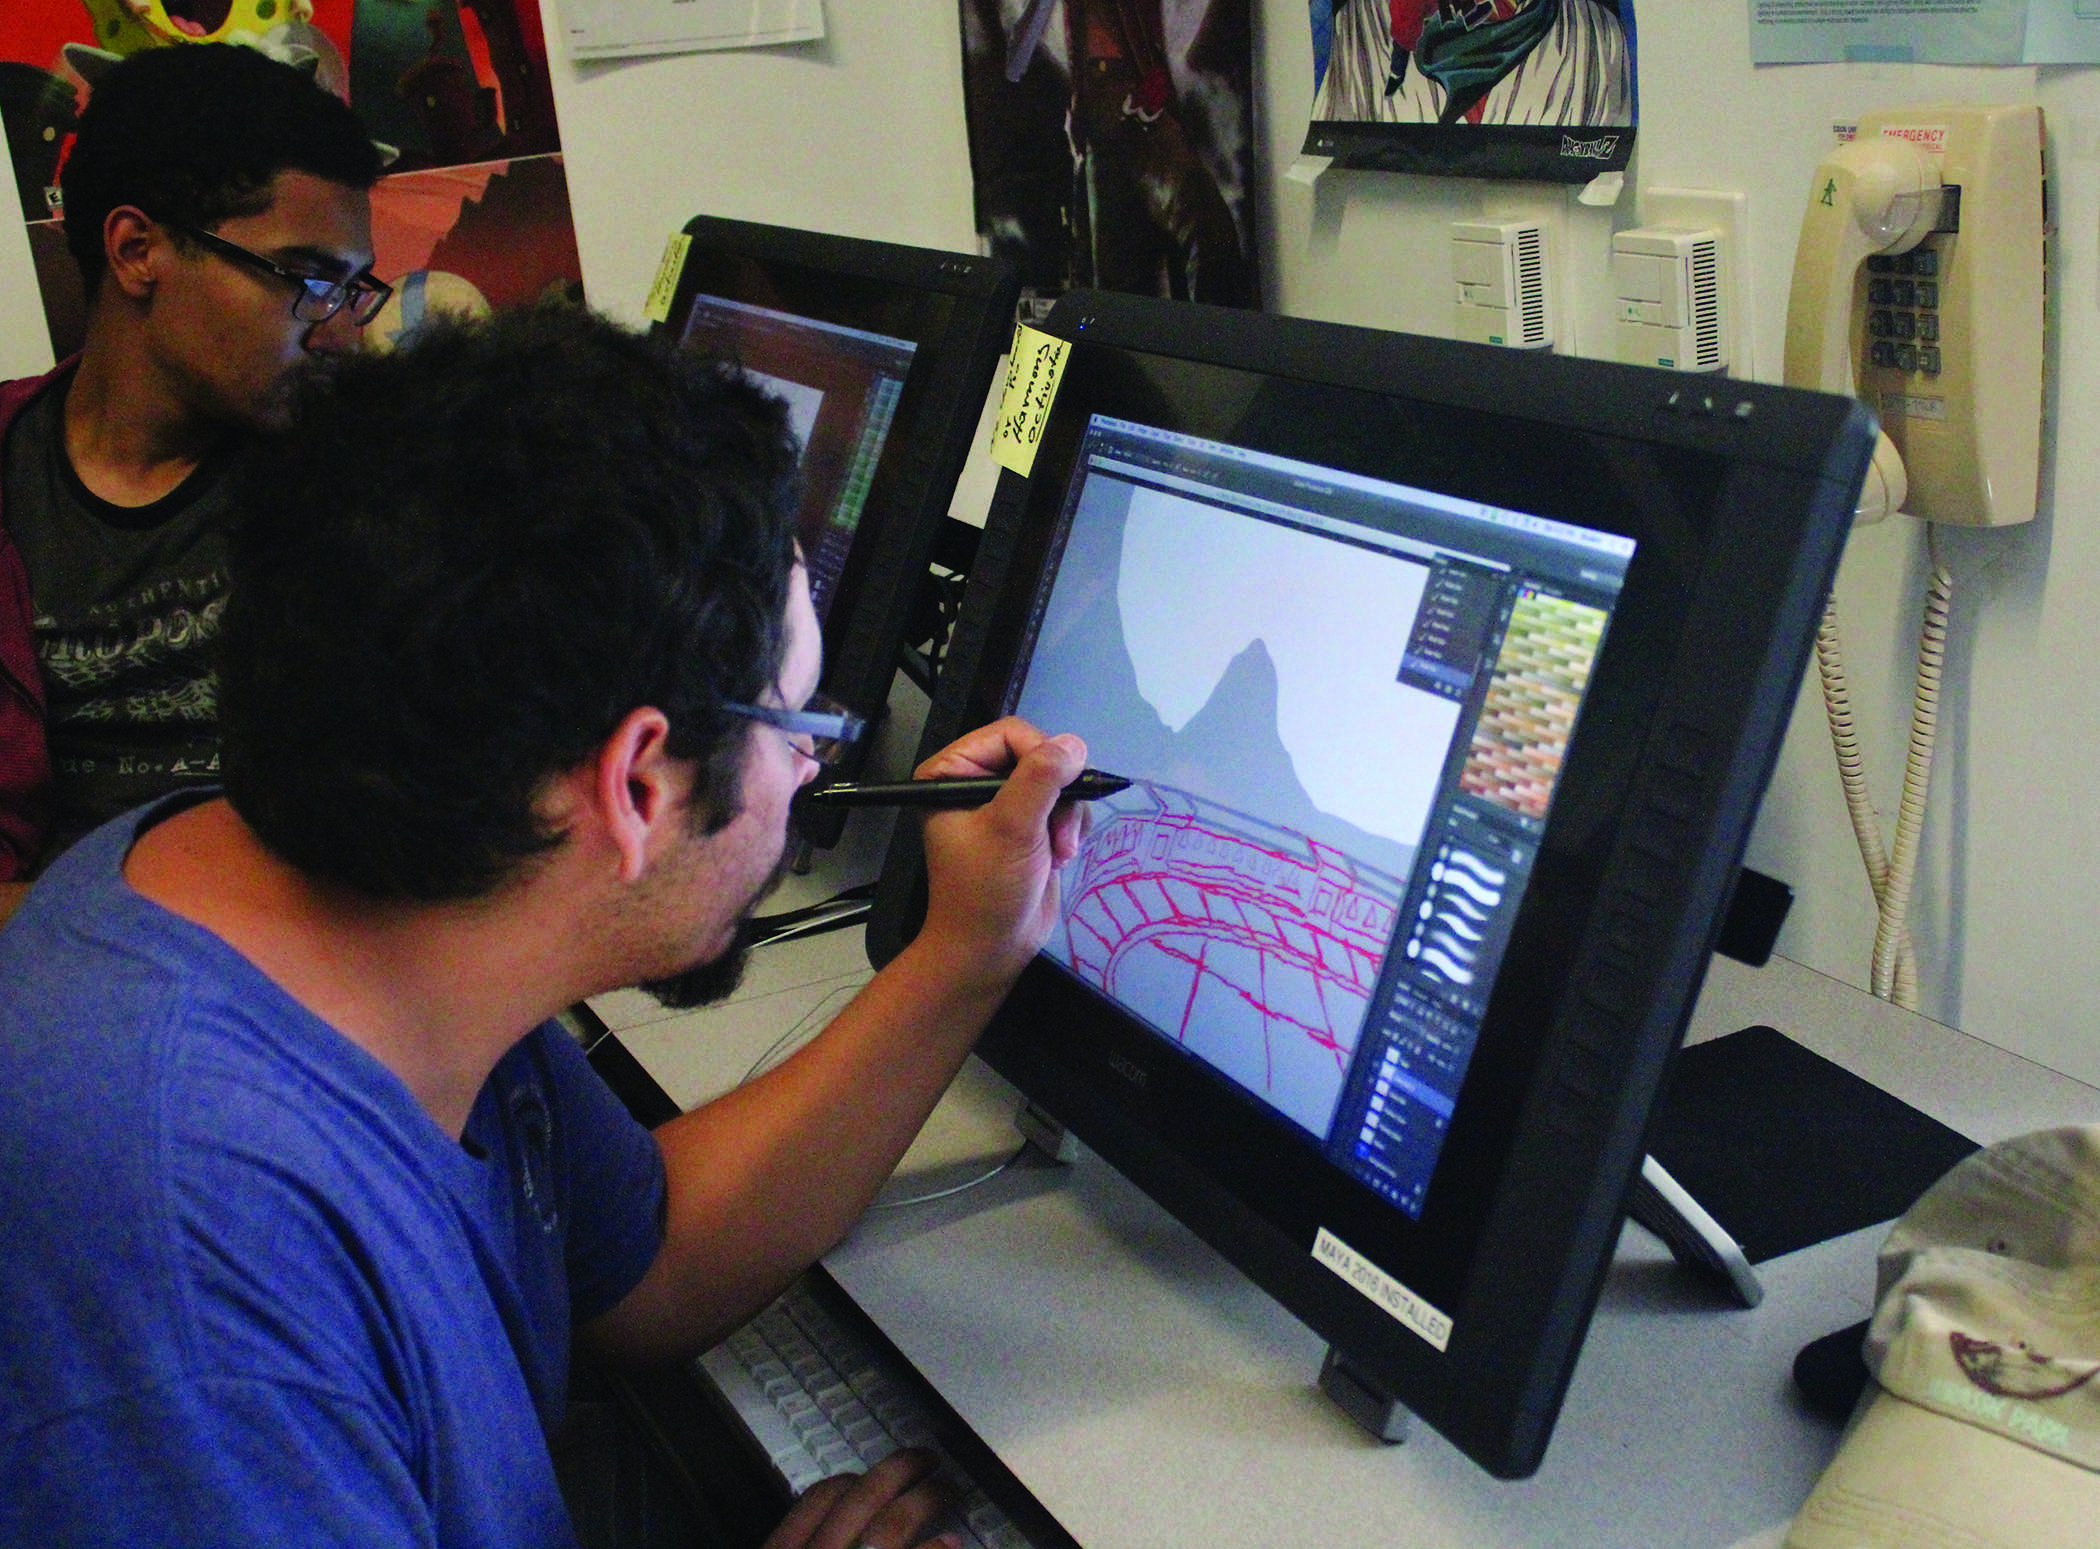 Animation students do some work shwoing how the workflow has changed as technology advances and the